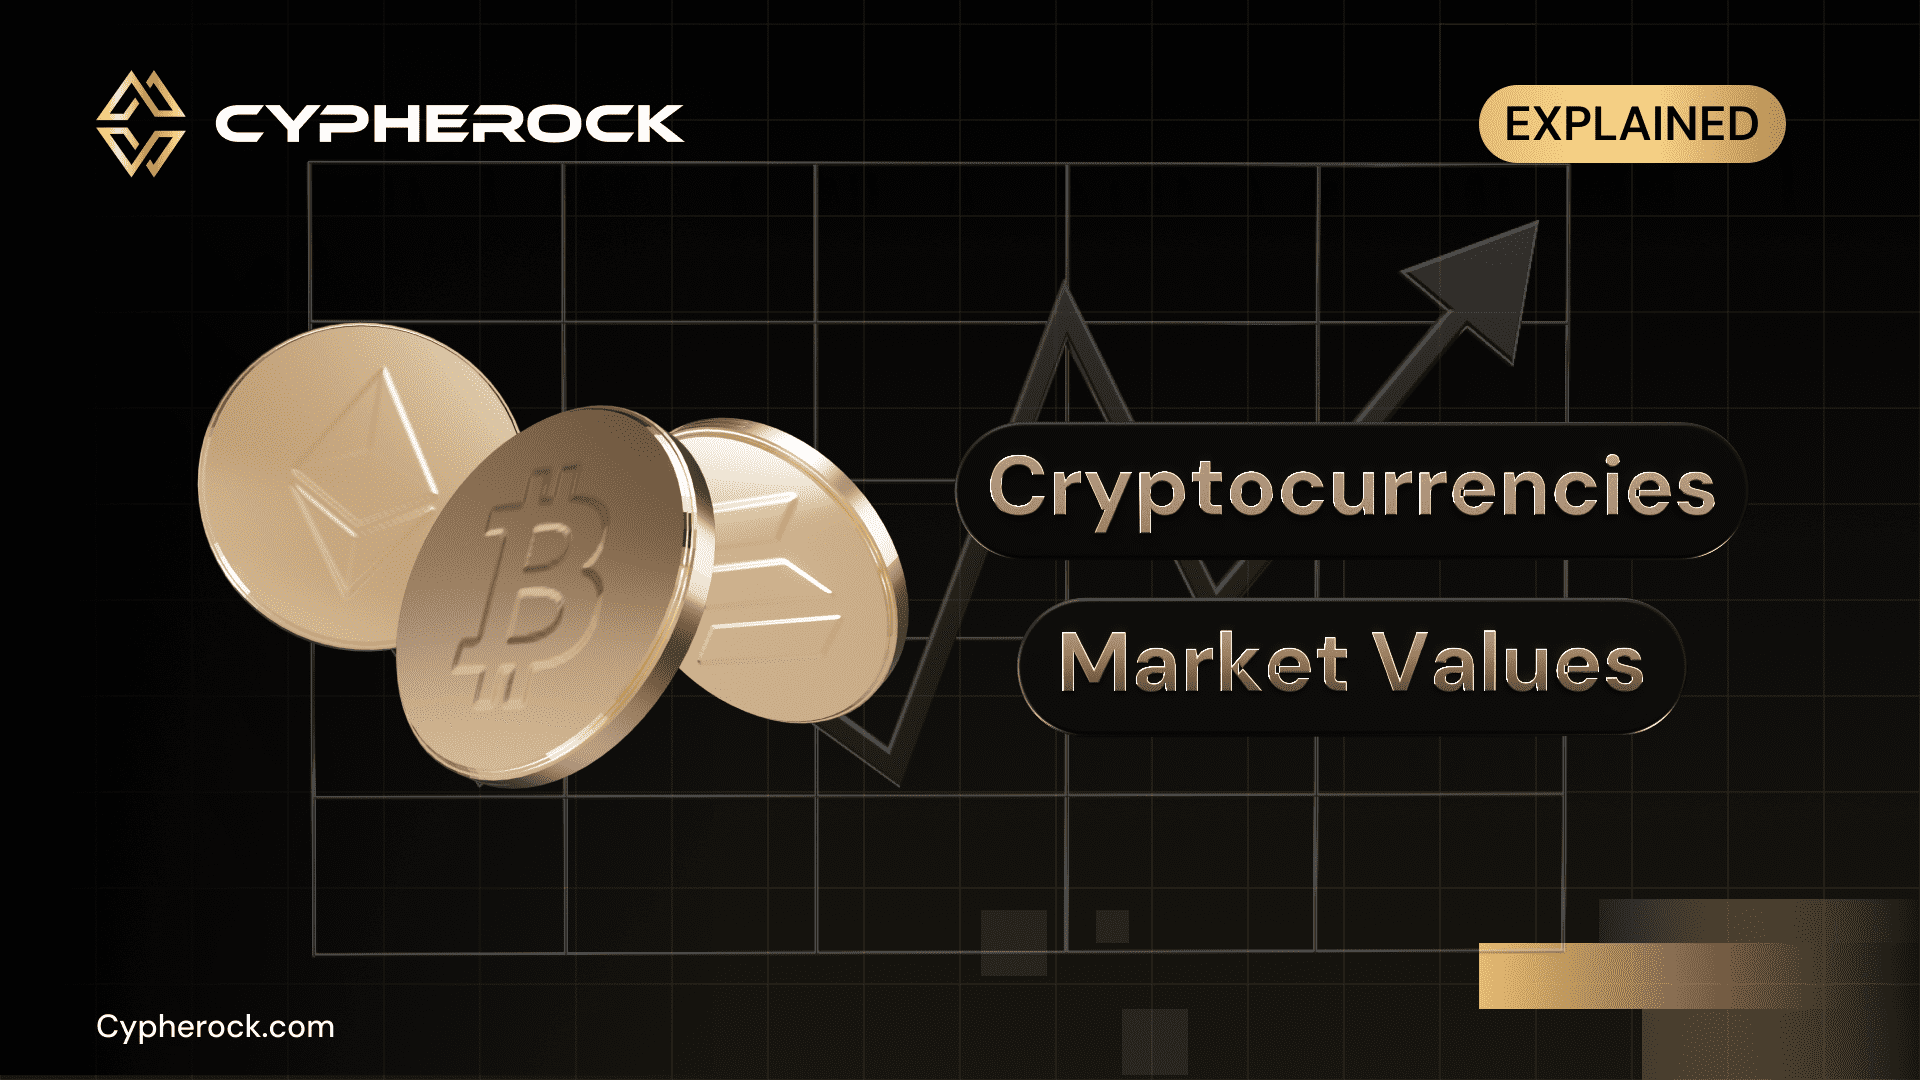 How Do Cryptocurrencies Attain Their Market Values?